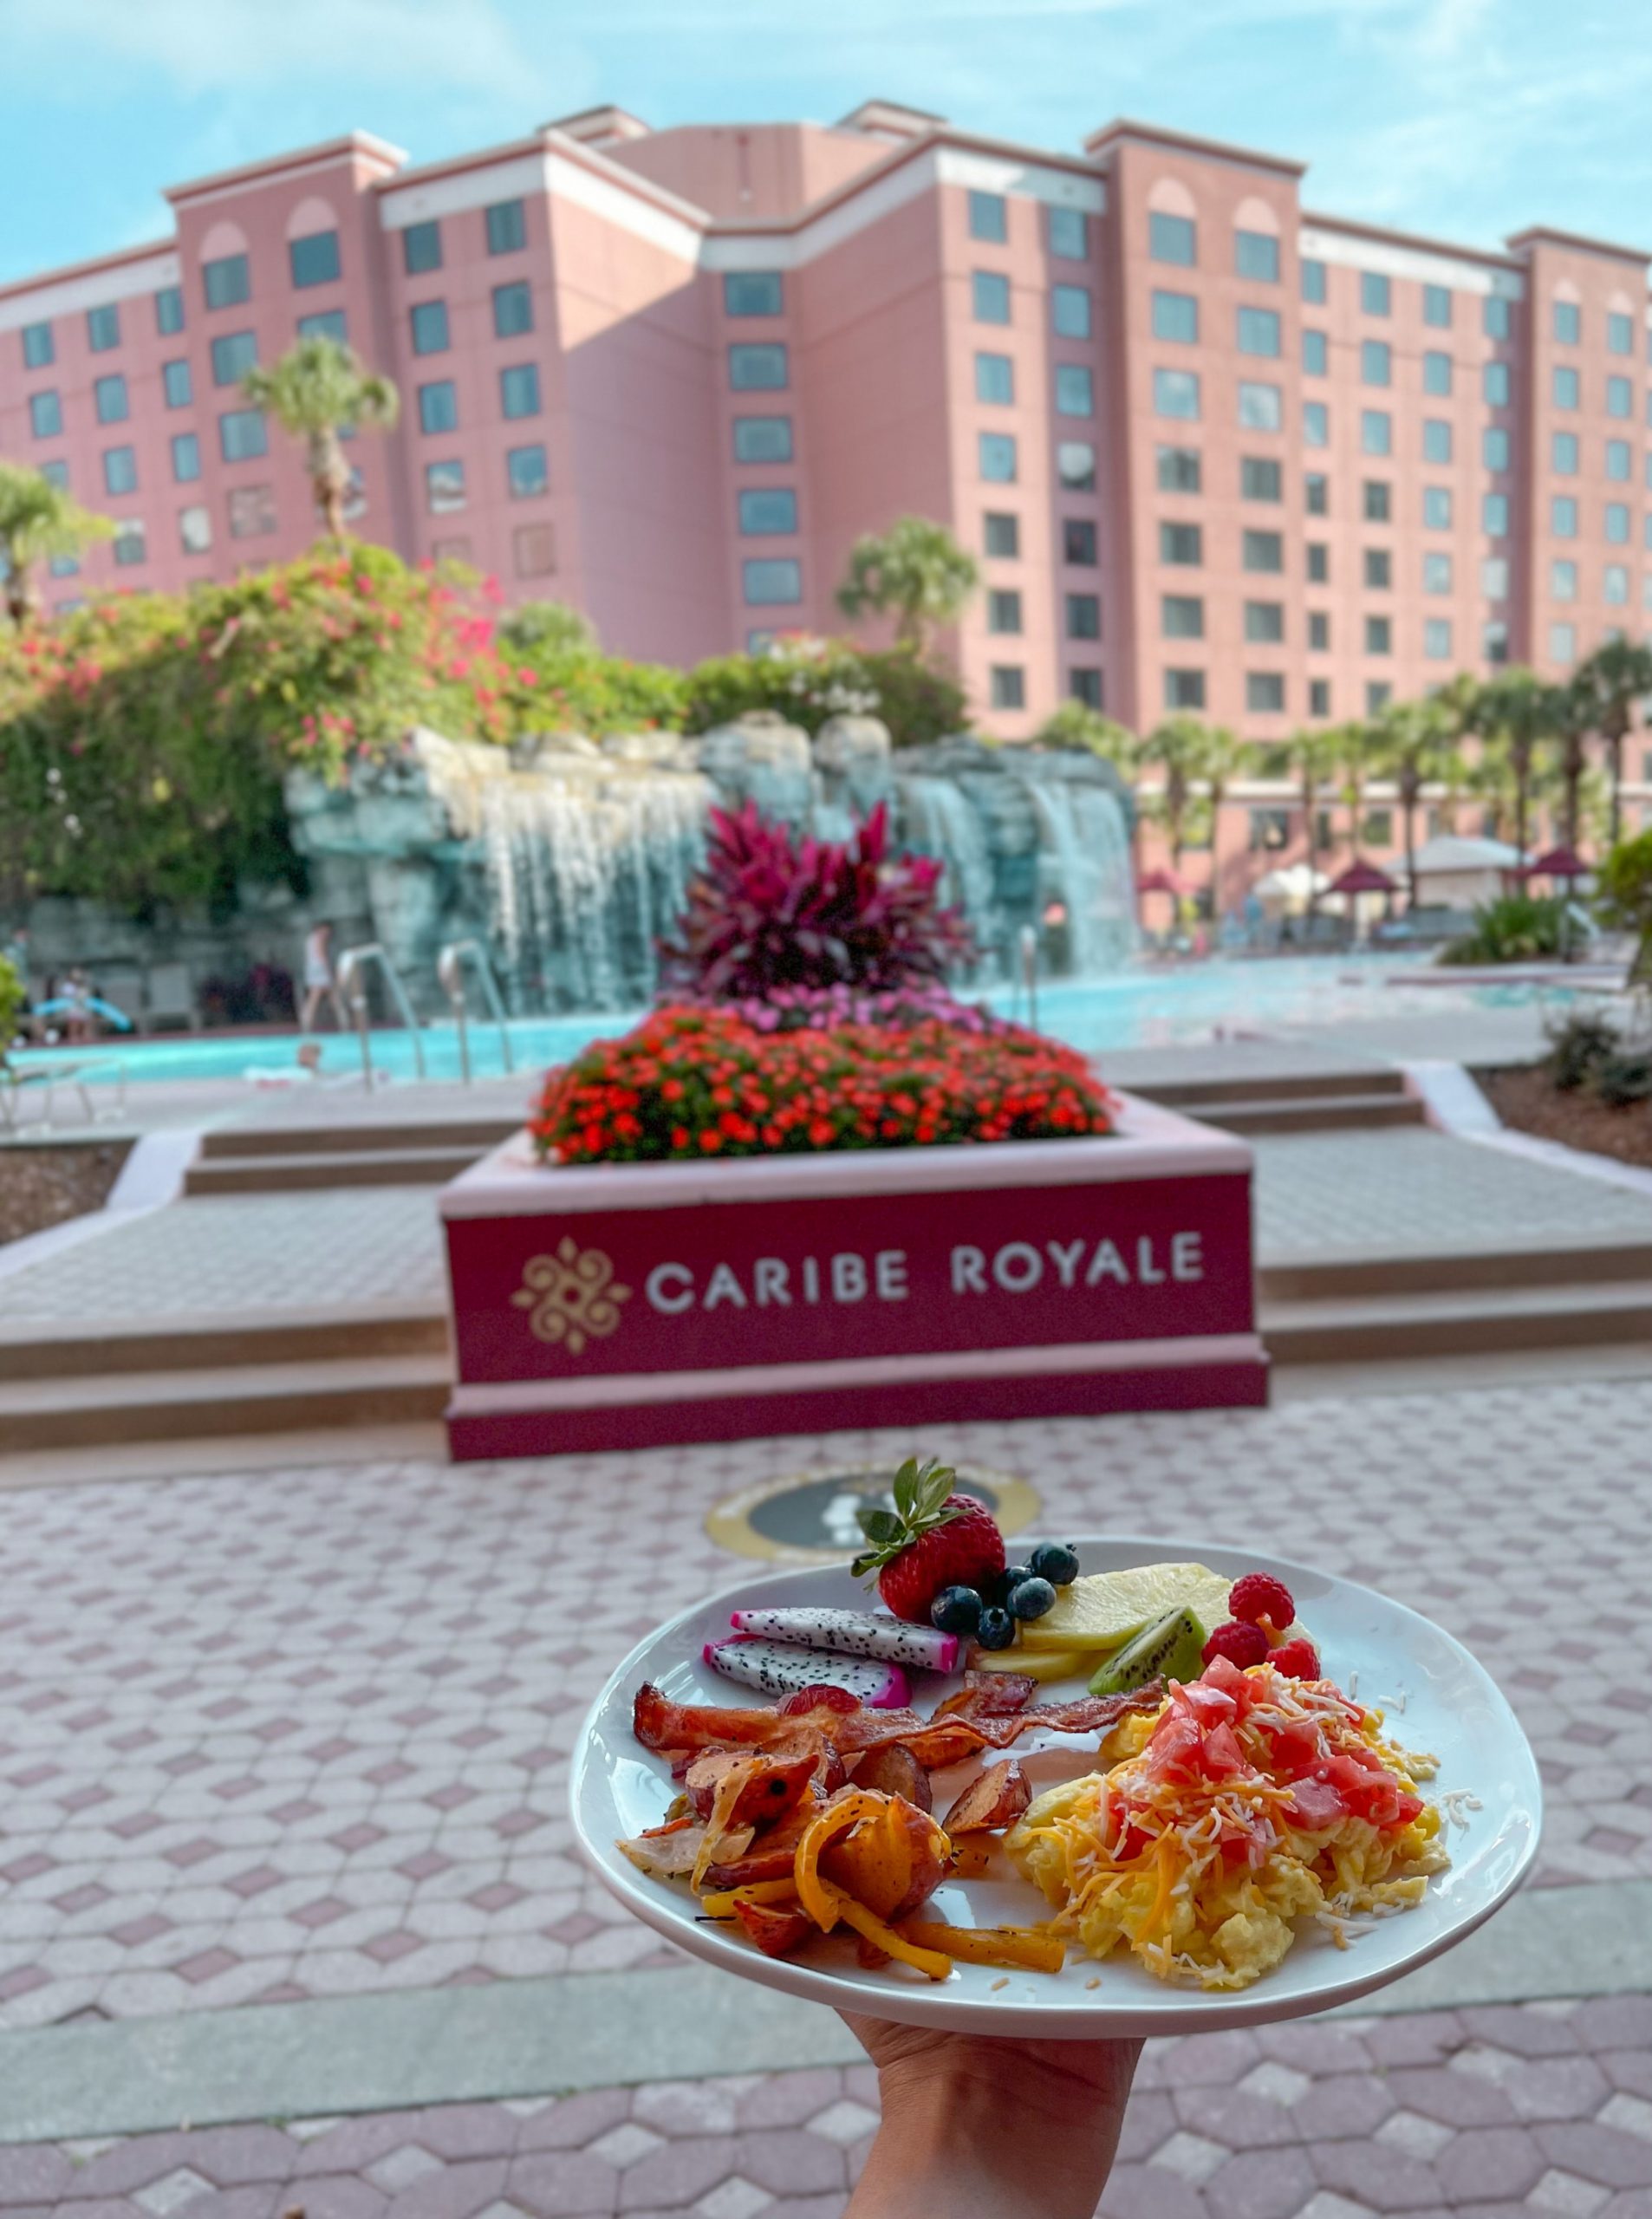 Caribe Royale dining options